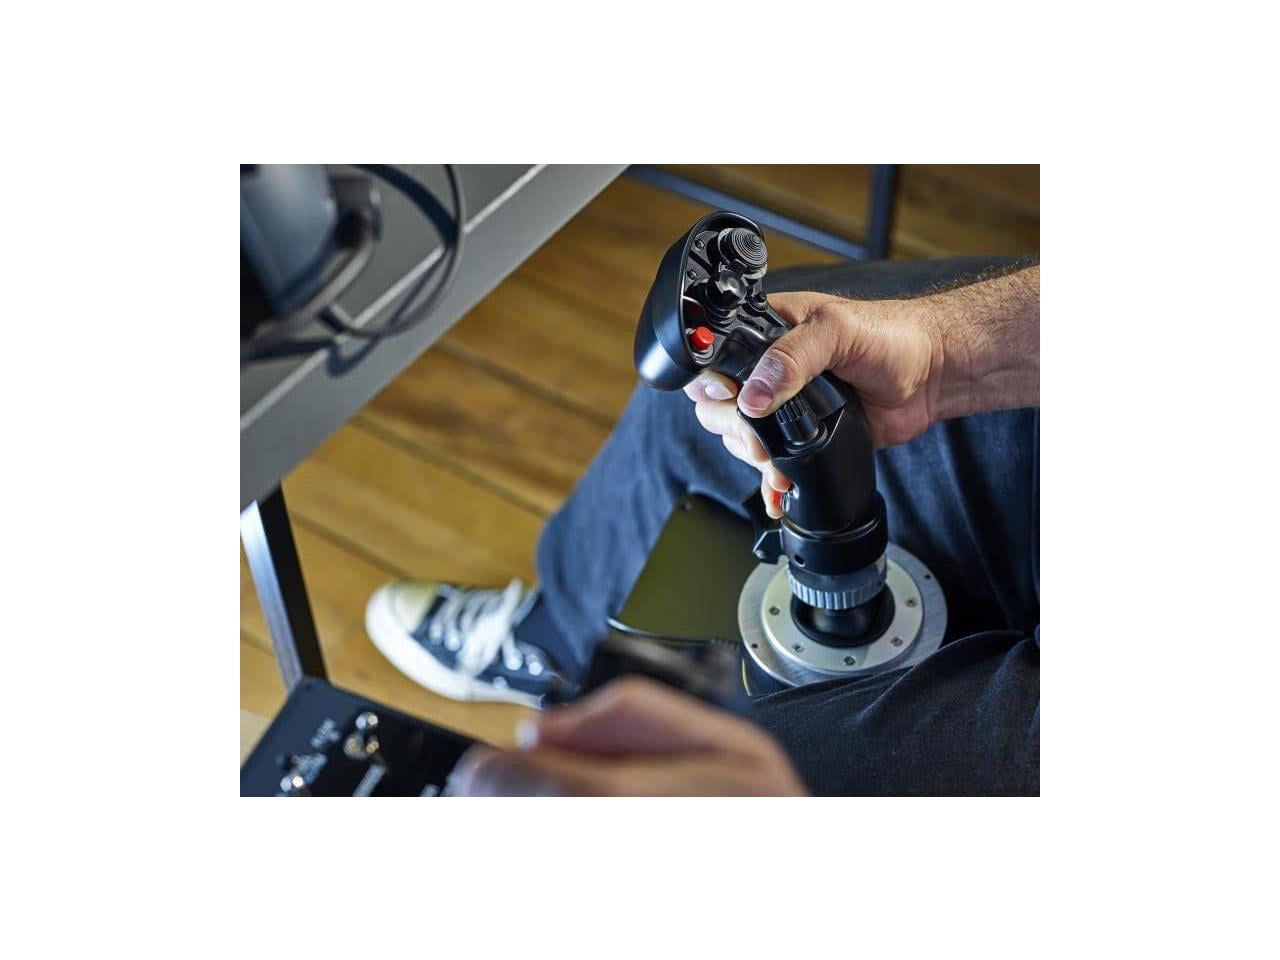 Thrustmaster F/A-18C Hornet HOTAS Add-On Grip for PC, VR 